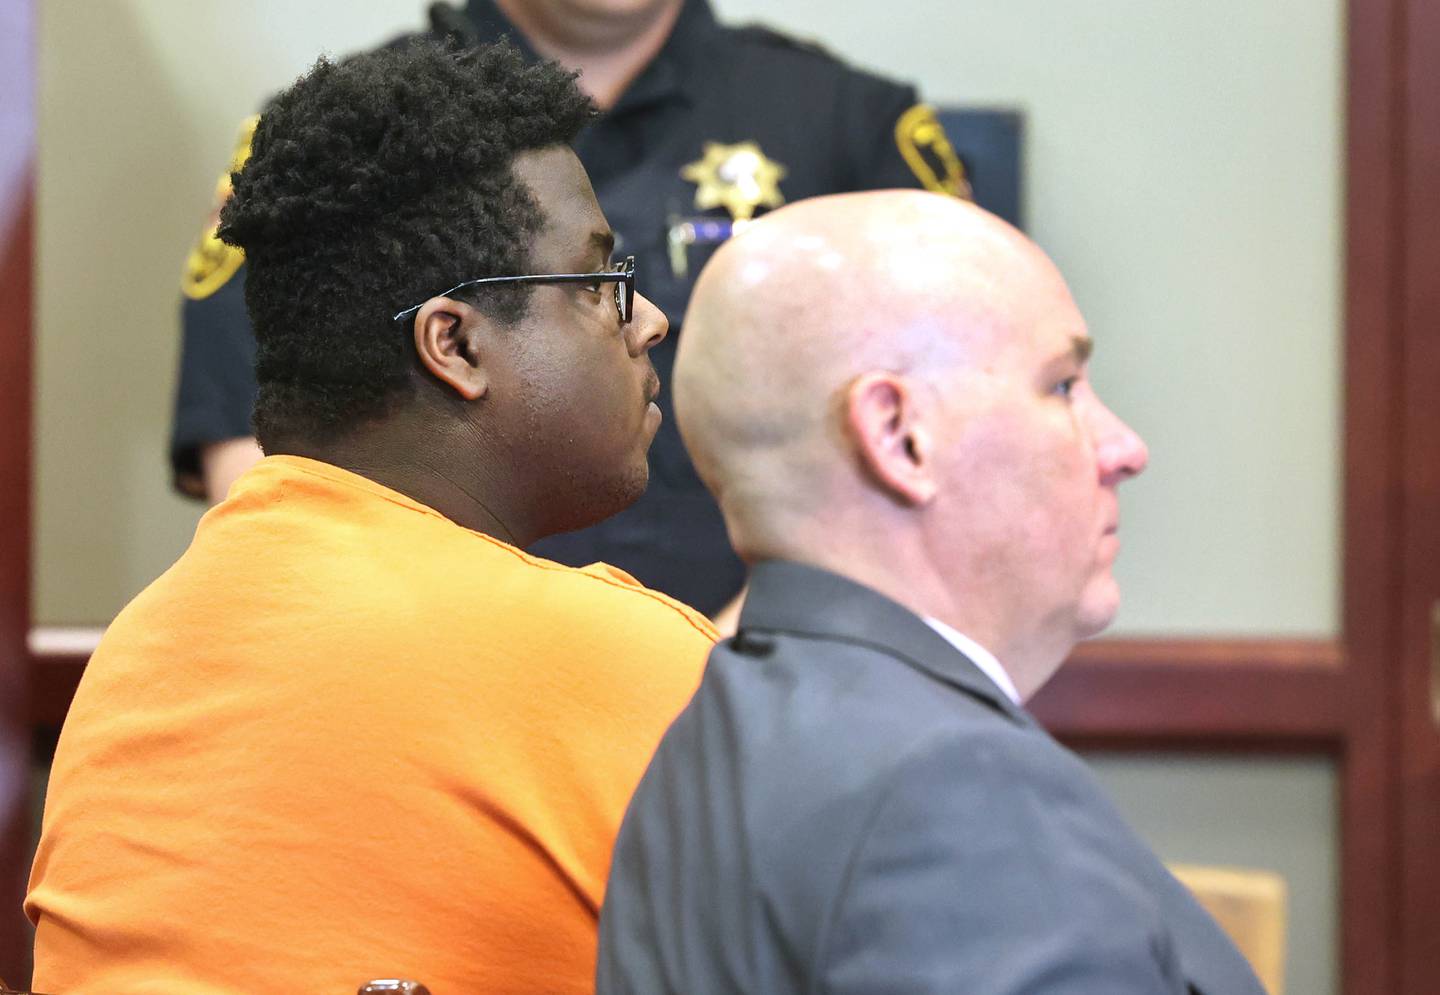 Timothy M. Doll, 29, of DeKalb, (left) and his attorney Andrew Nickel listen as Circuit Court Judge Philip Montgomery reads the charges against him Wednesday, June 14, 2023, at the DeKalb County Courthouse. Doll is being arraigned on several charges including two counts of first-degree murder in the death of 15-year-old Gracie Sasso-Cleveland of DeKalb.